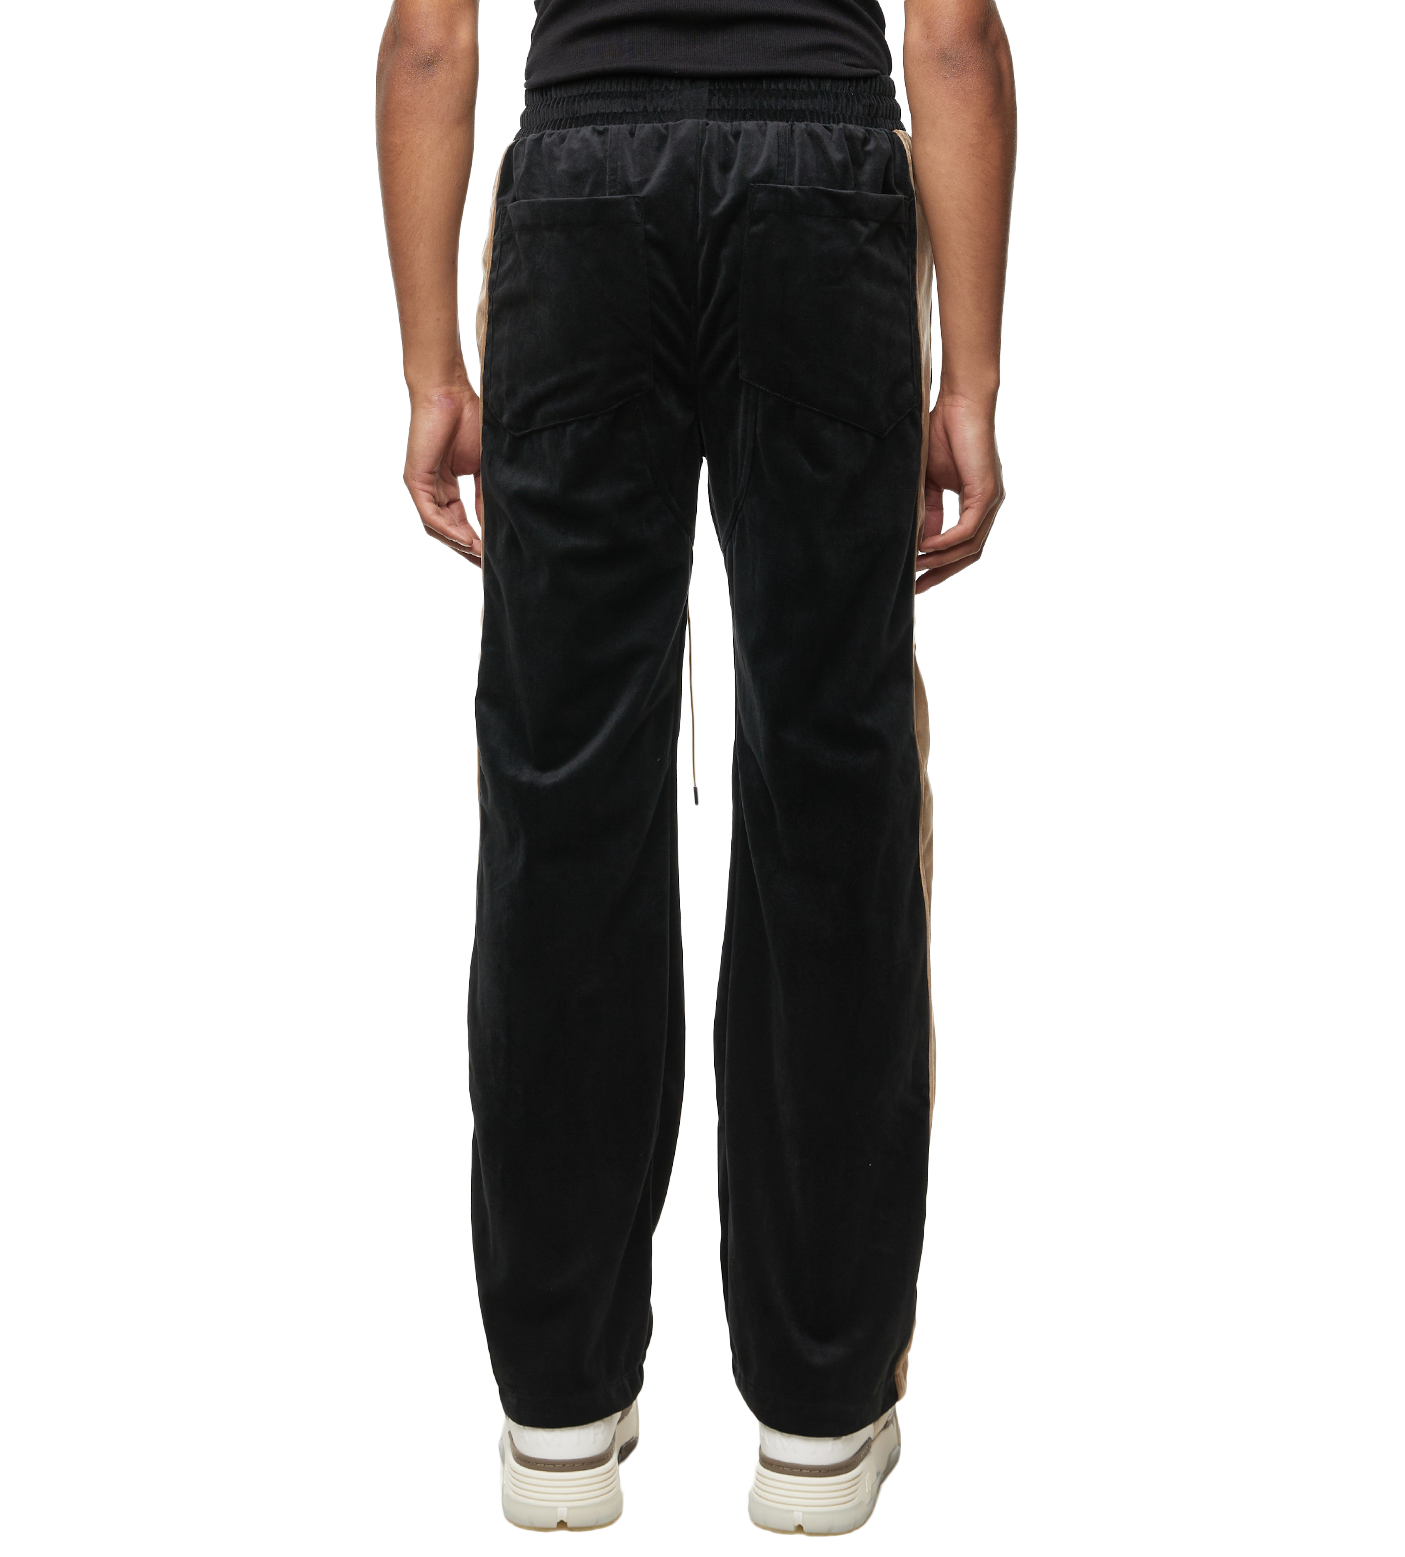 Embroidered Lounge Pants Black